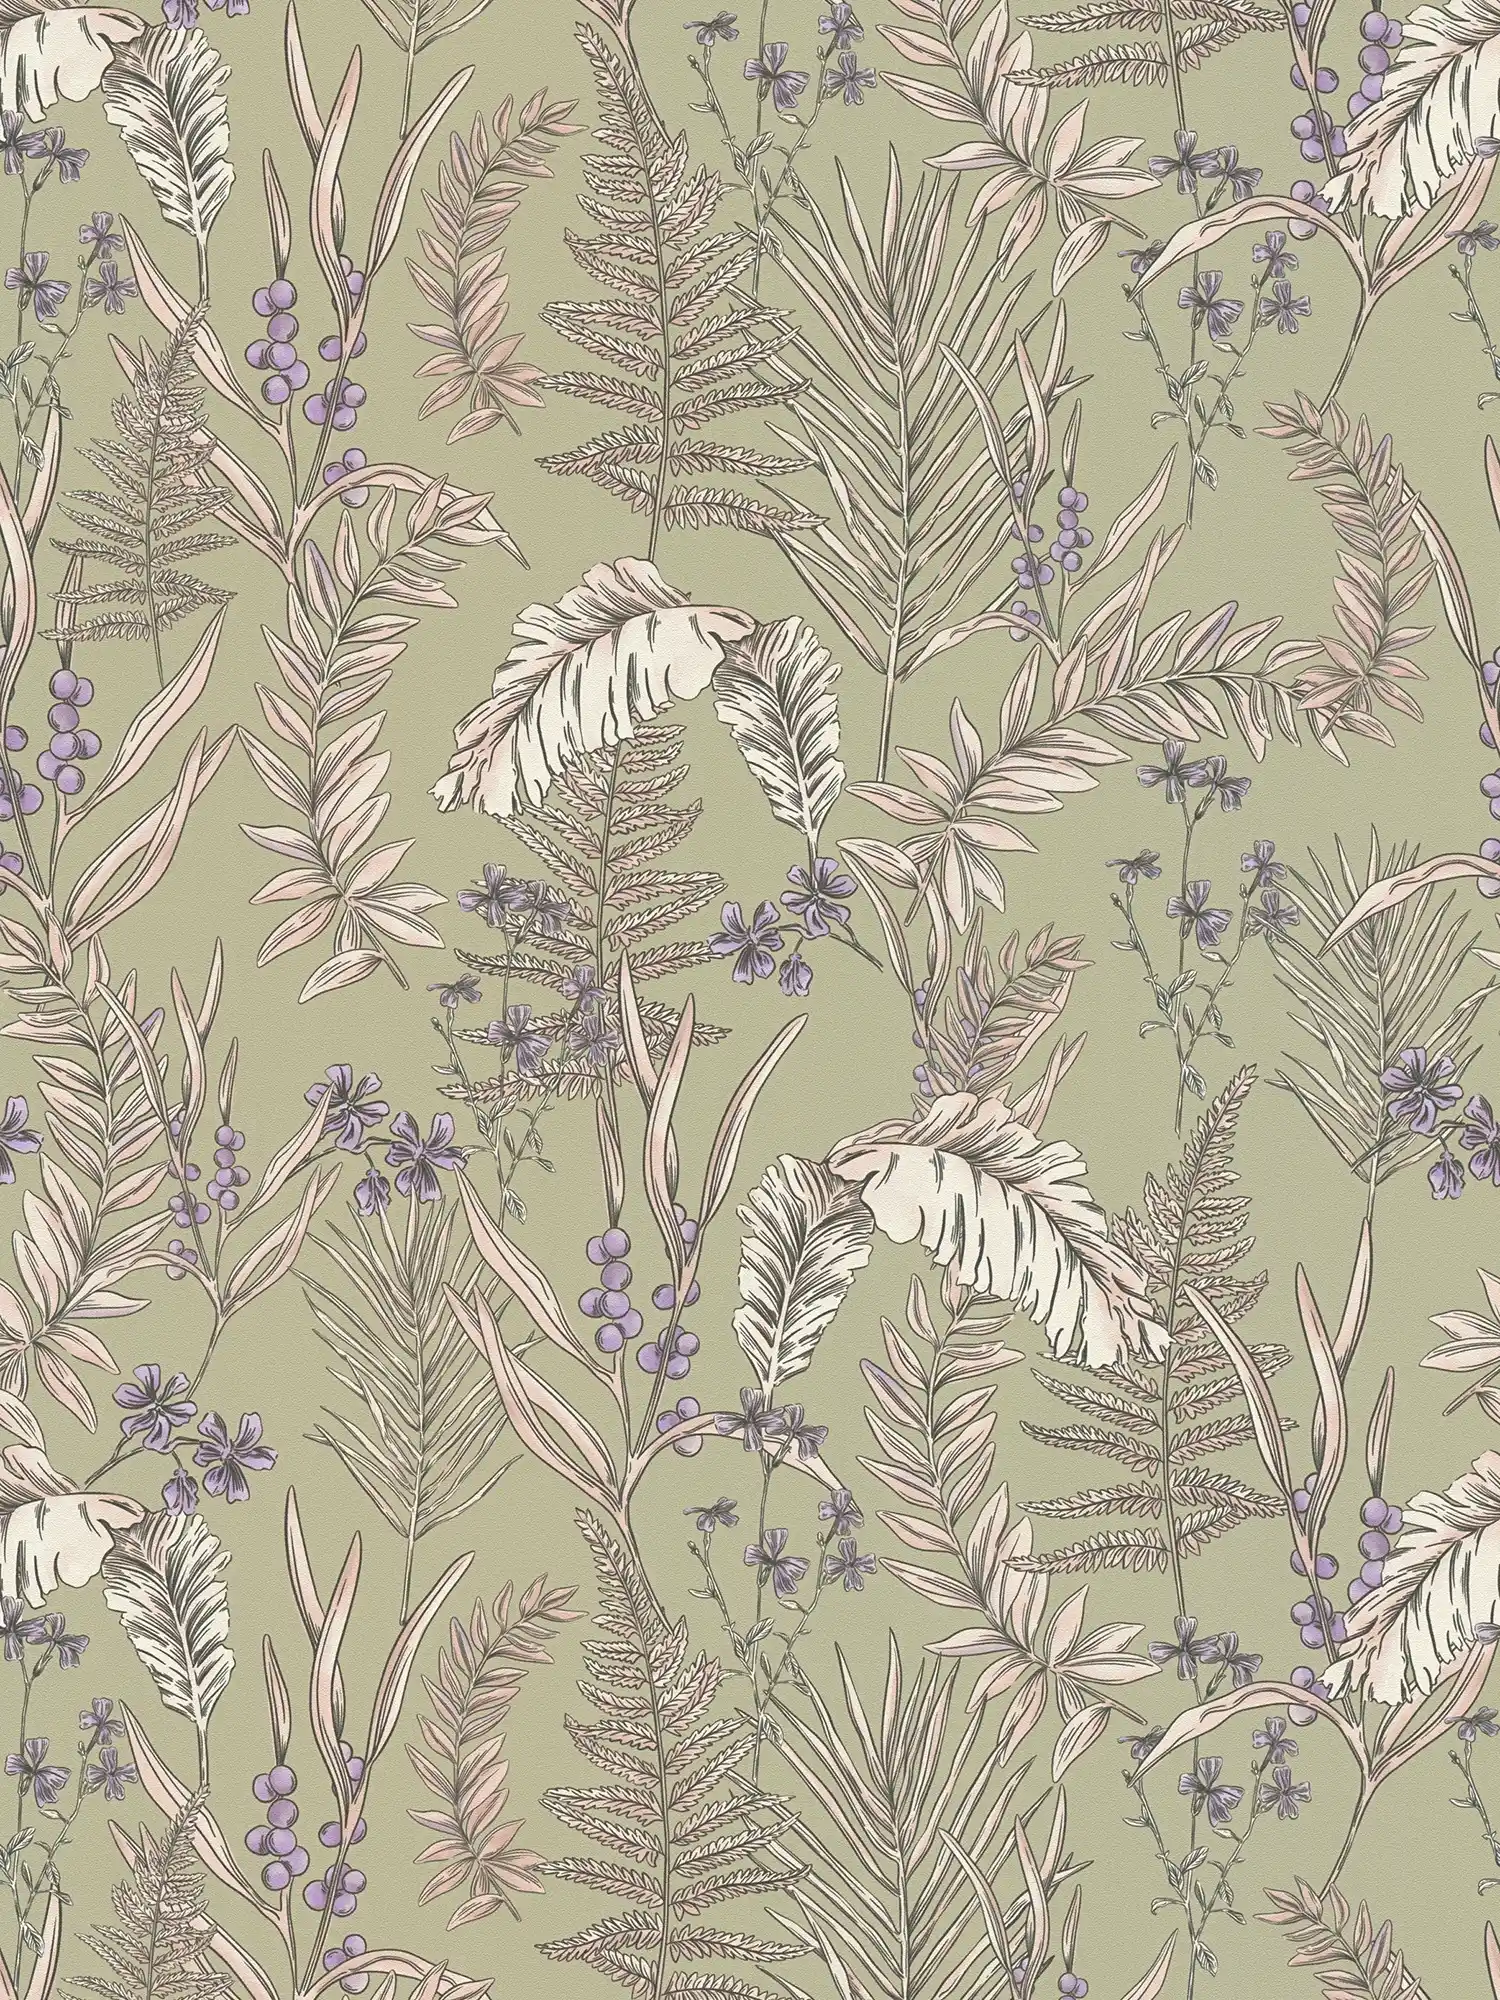 Modern floral style wallpaper with leaves & flowers textured - grey, cream, purple
